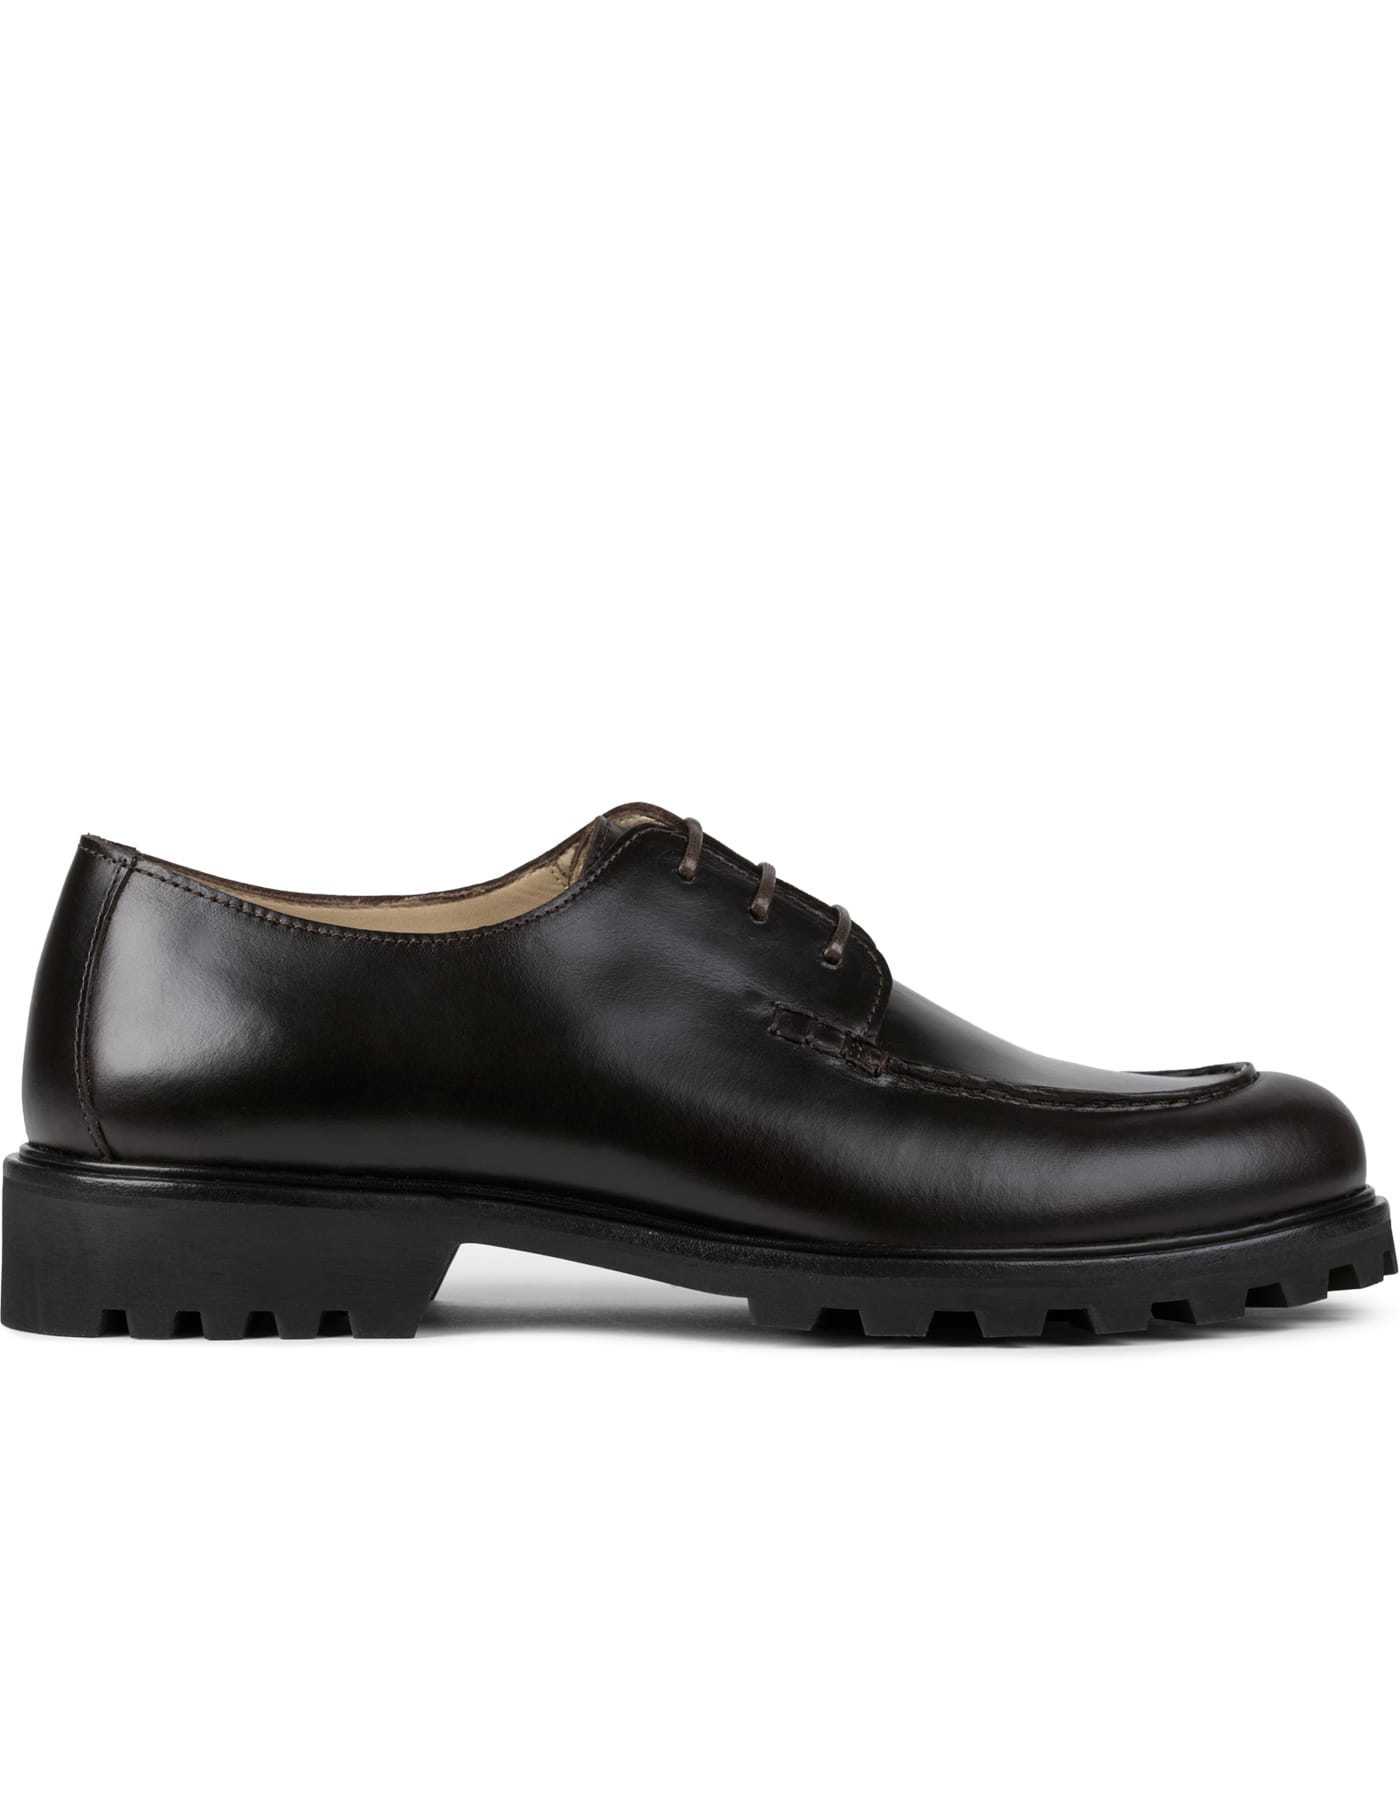 A.P.C. - Marron Fonce Derbies Leon Shoes | HBX - Globally Curated